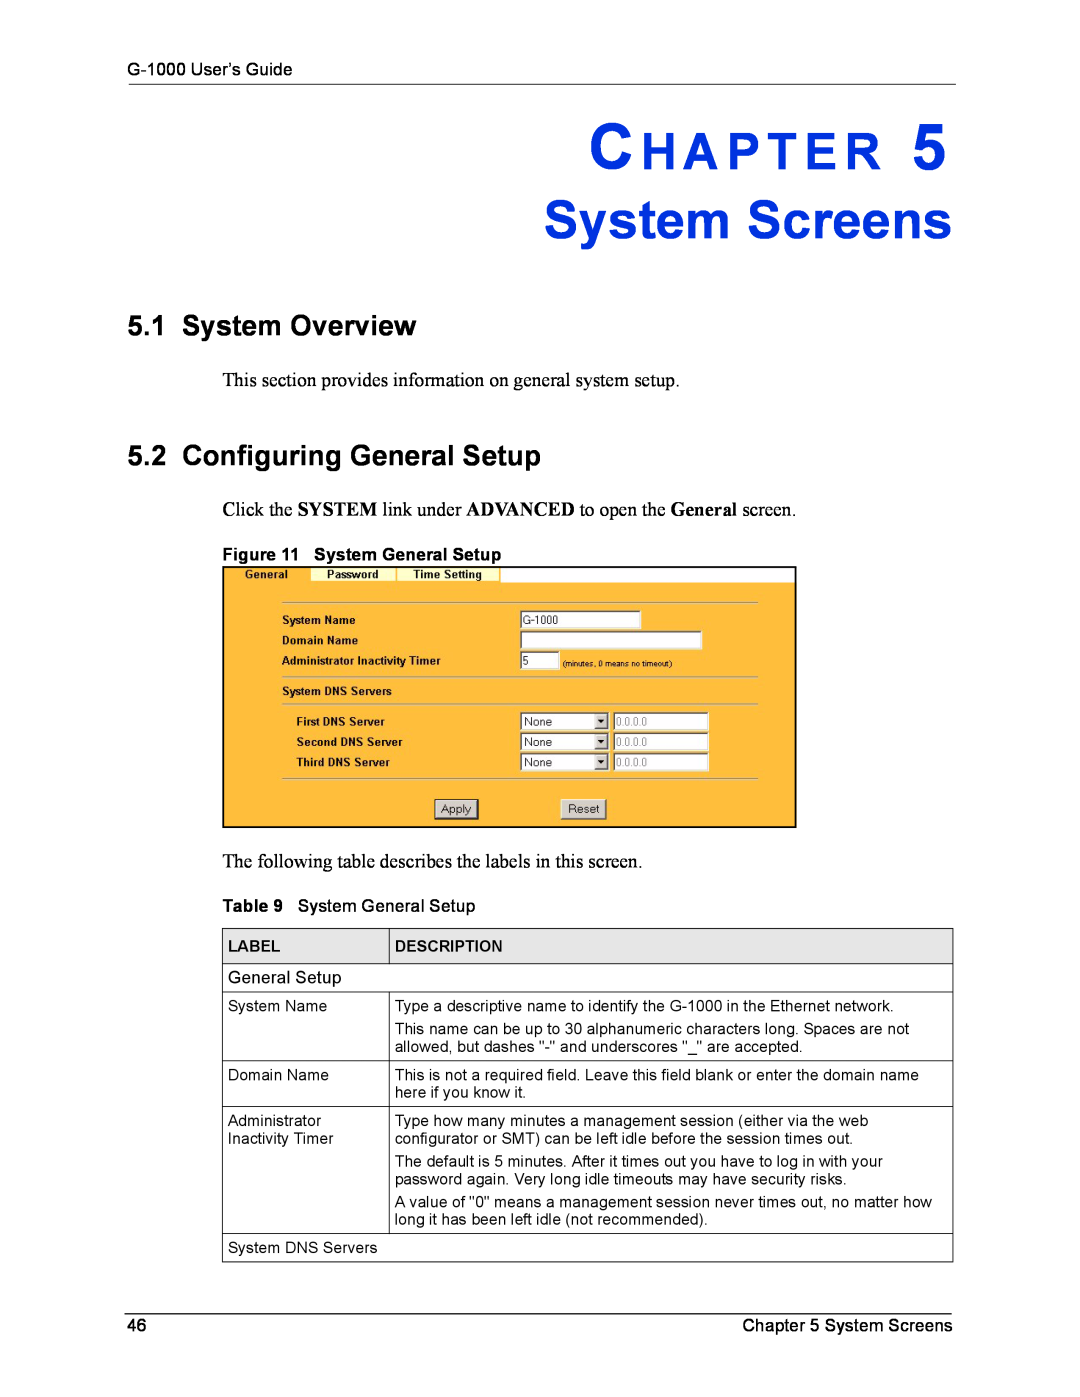 ZyXEL Communications System Screens, System Overview, Configuring General Setup, Ch A P T E R, G-1000 User’s Guide 